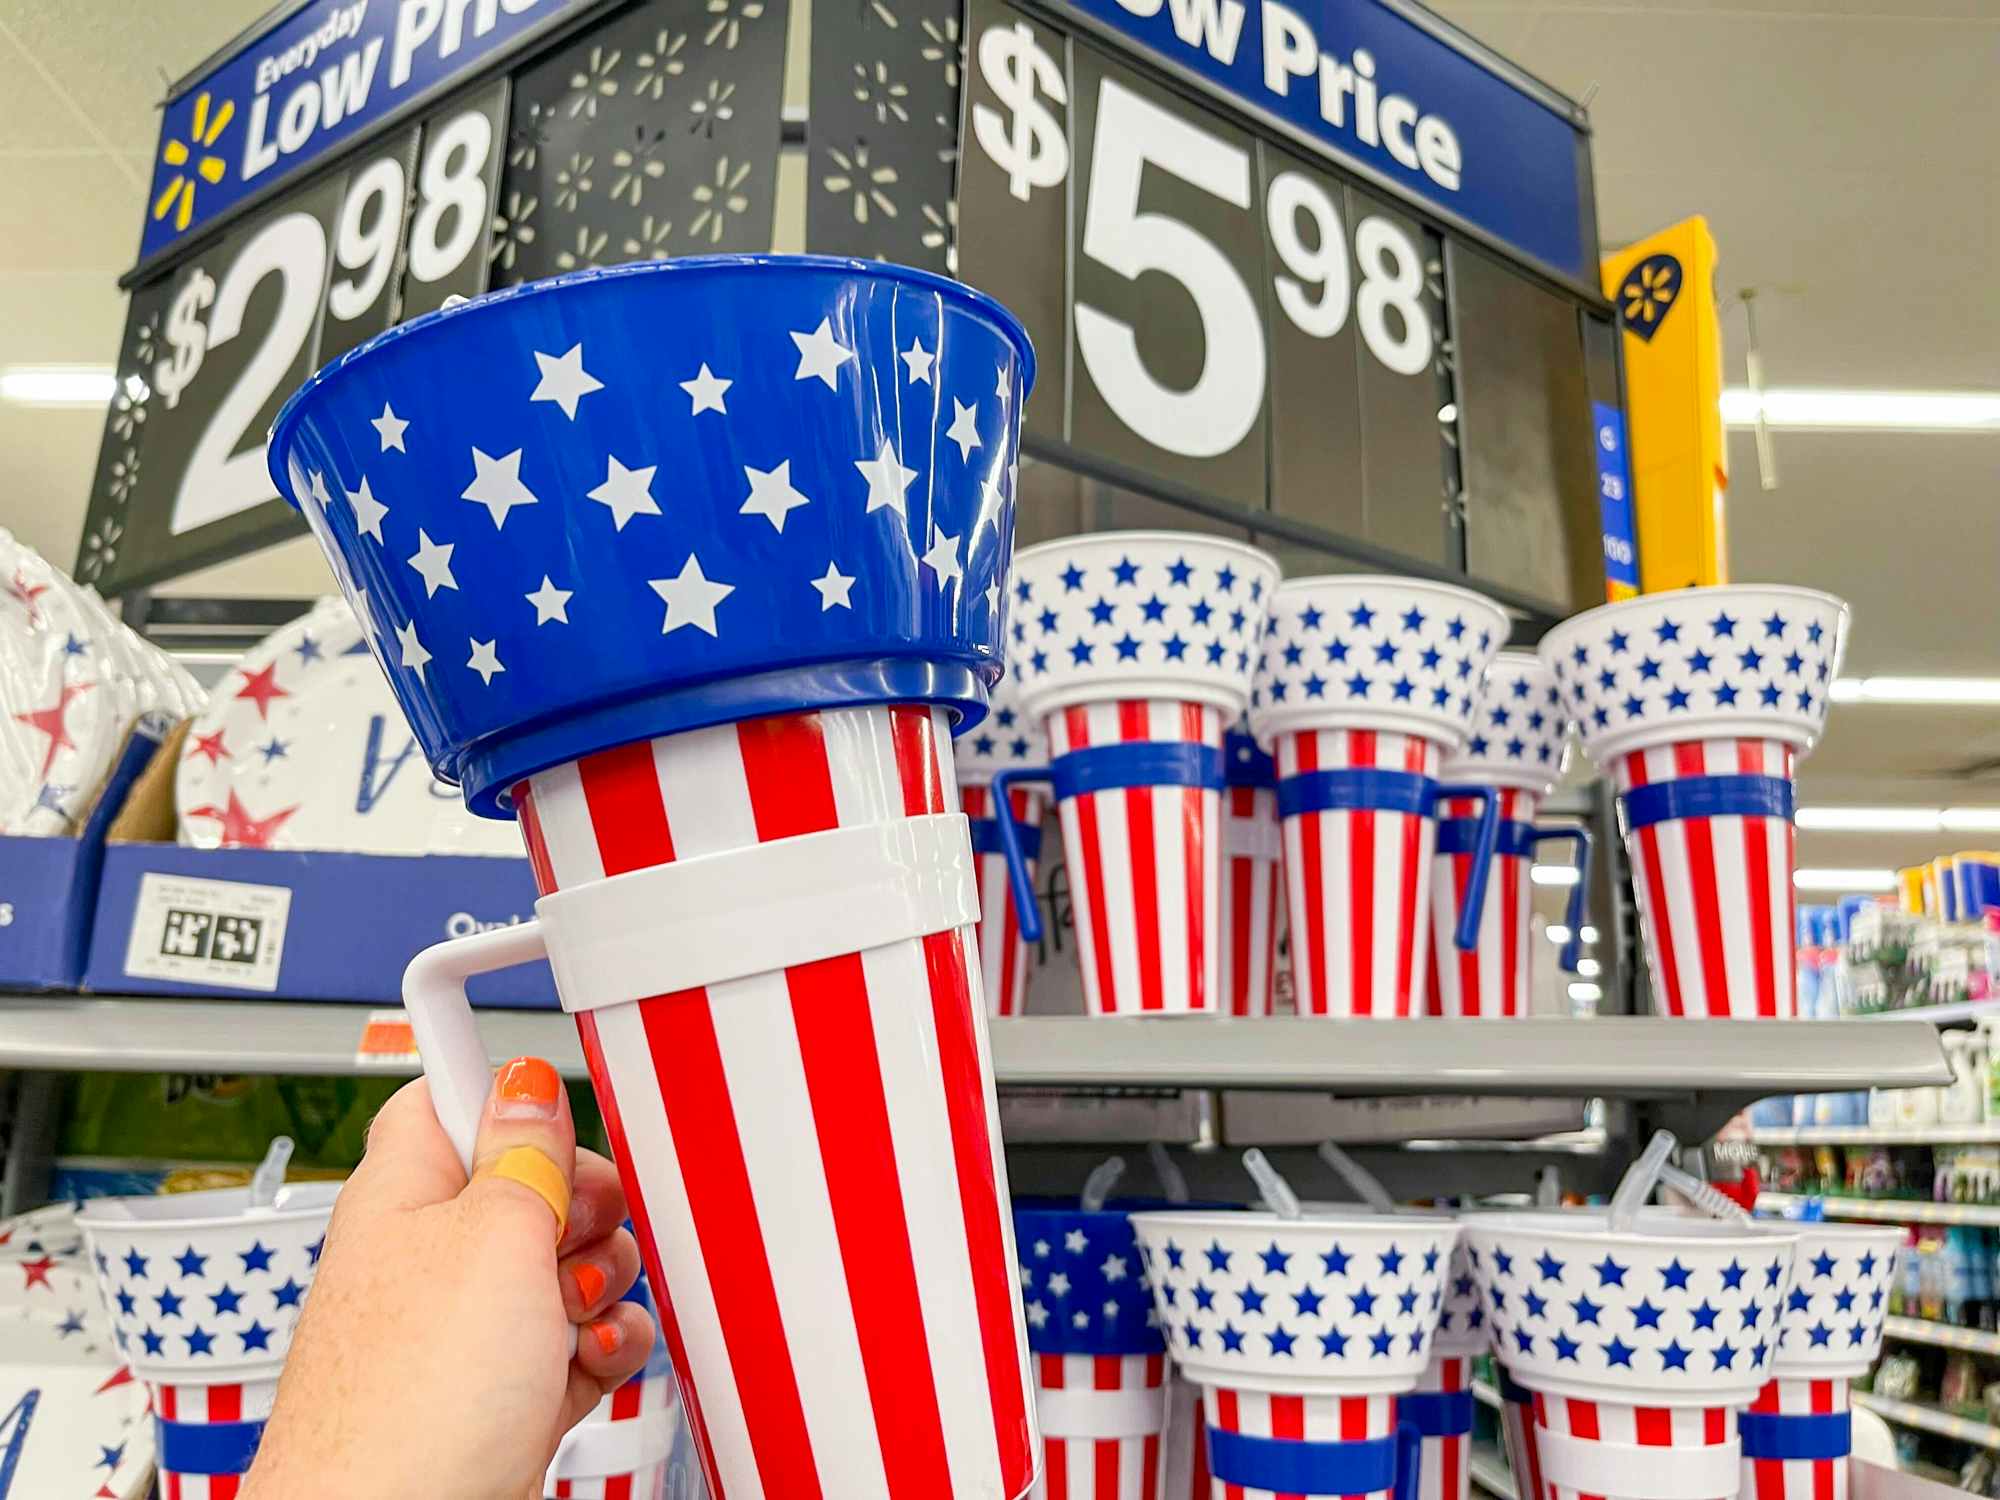 a hand holding up a fourth of july cup in walmart